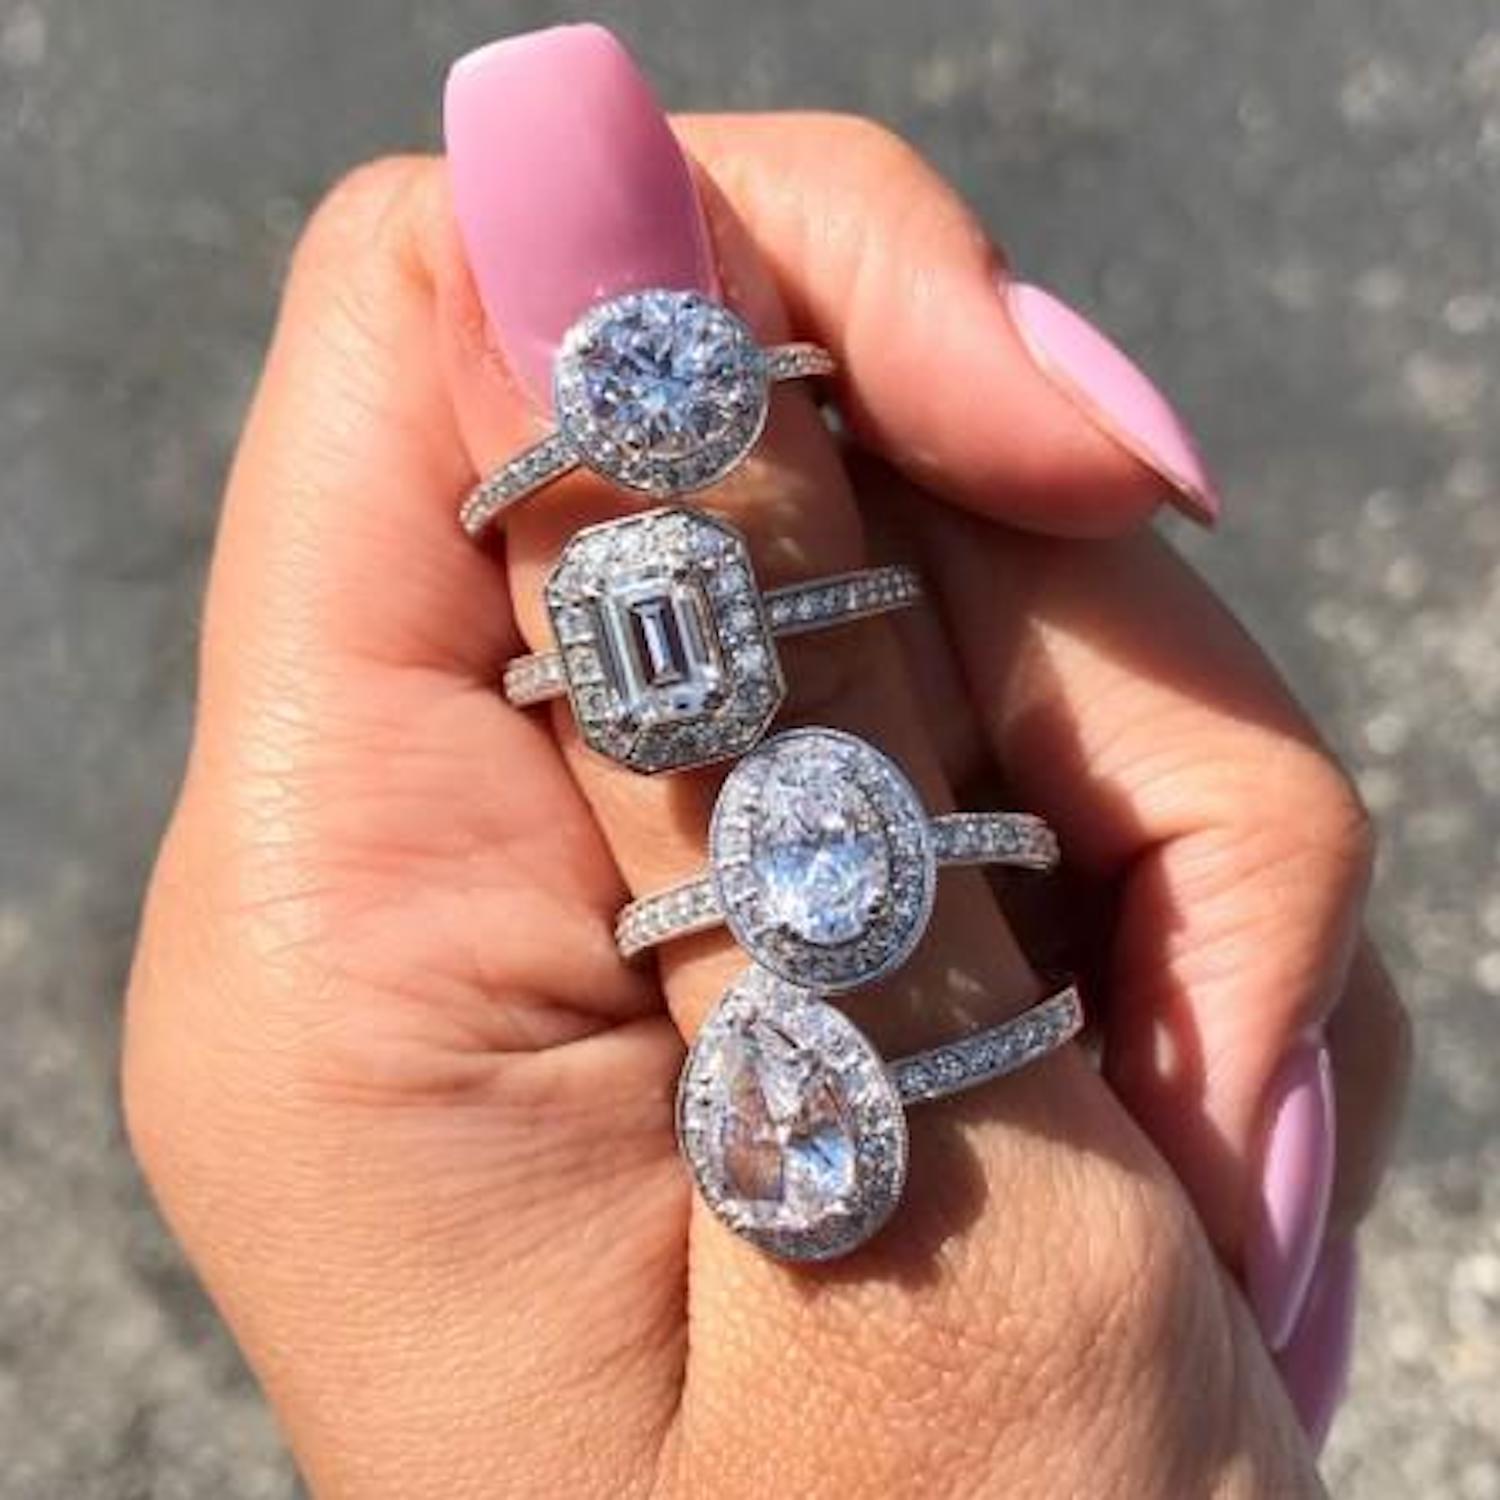 Vintage engagement ring styles